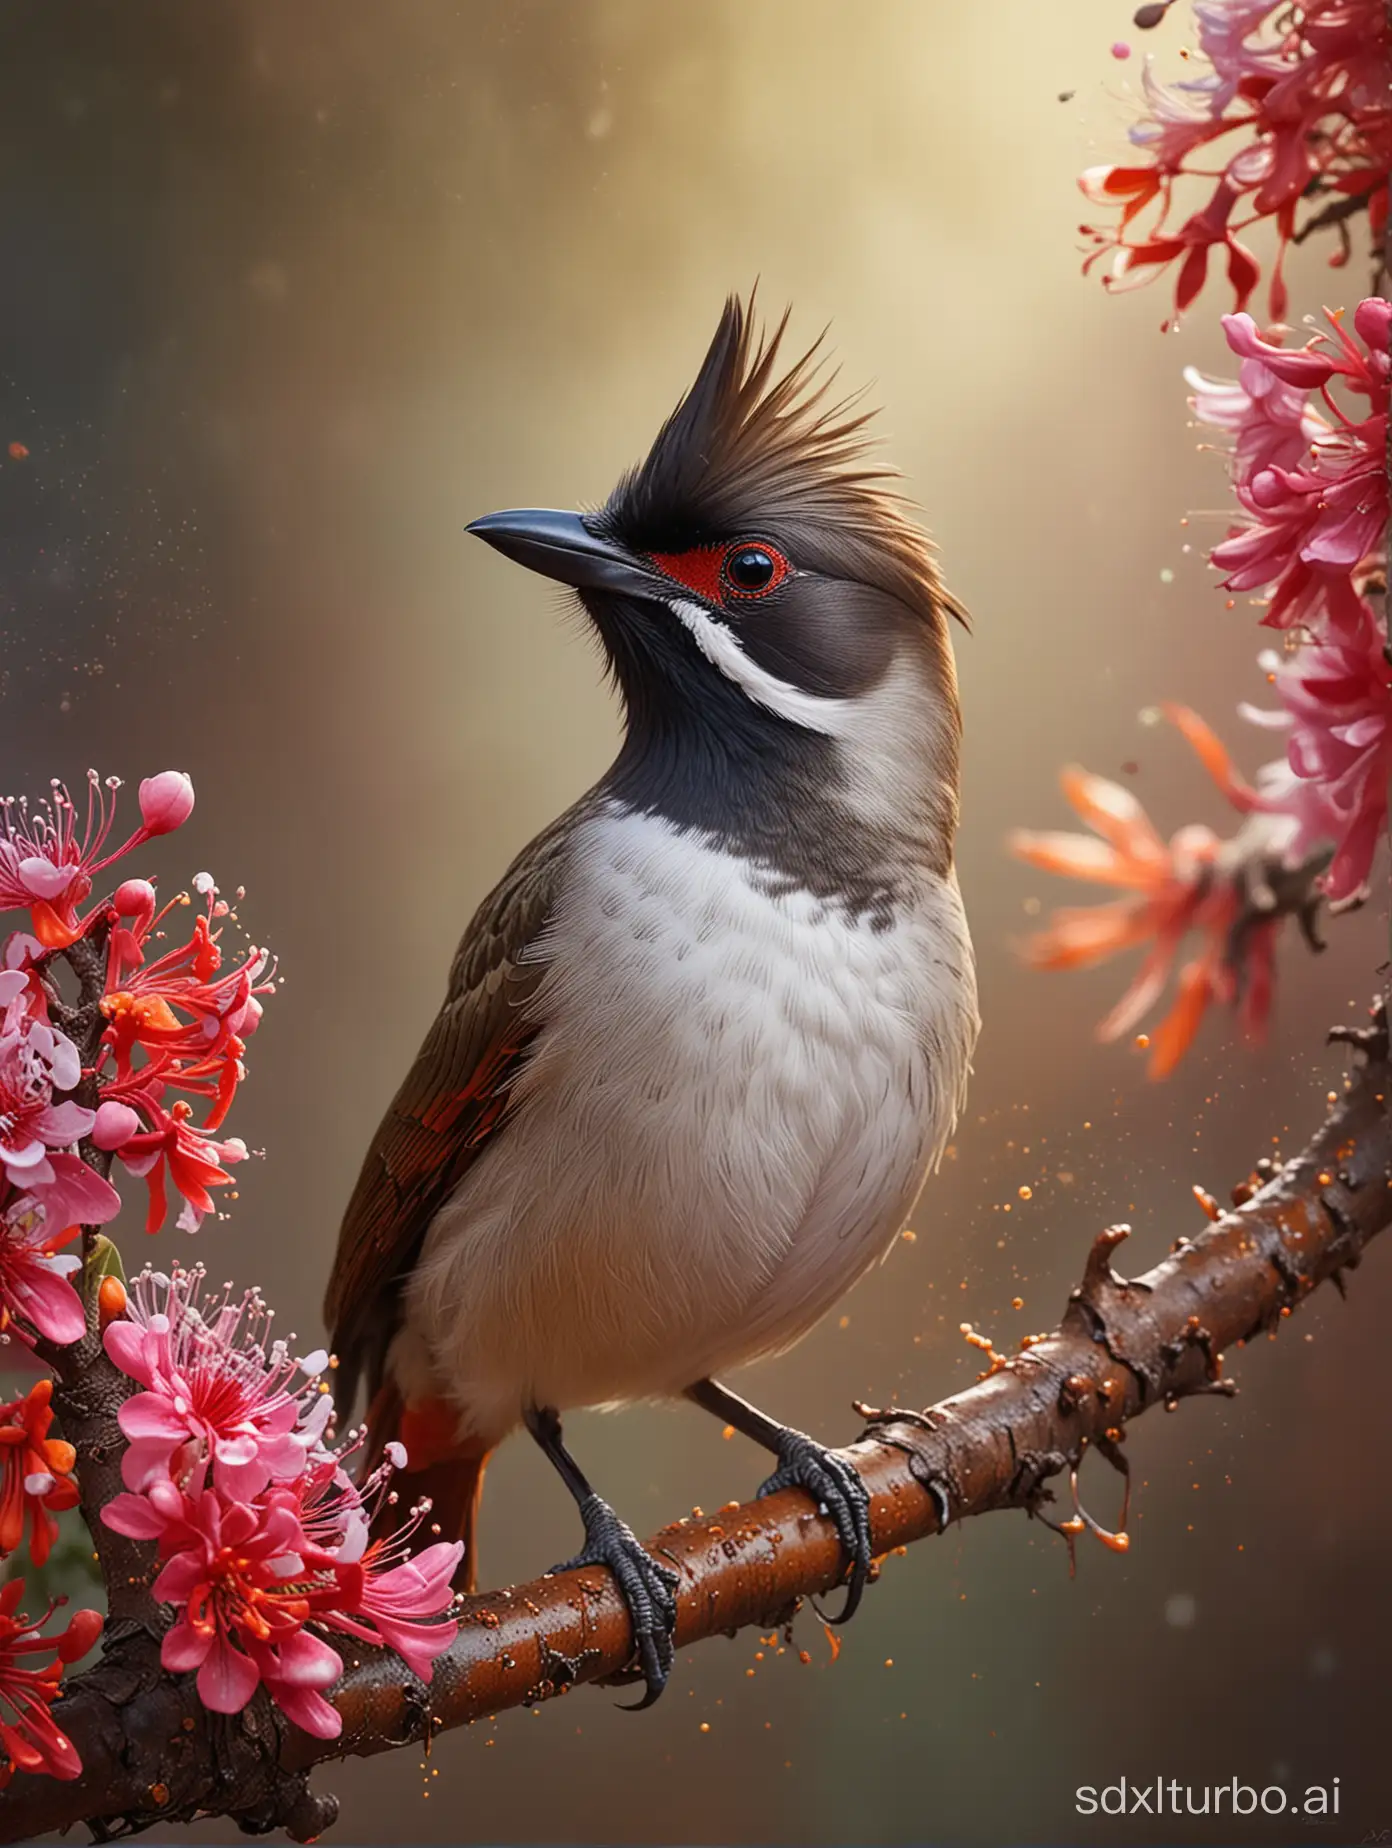 A vibrant and dynamic wildlife portrait of a red-whiskered bulbul in a side profile, adorned with a riotous array of flowers. The bird's eyes are exquisitely detailed, with a sense of depth and dimensionality. The background is a mesmerizing explosion of primary, secondary, and tertiary colors, featuring splashes, splatters, and speckles. Gold accents accentuate the composition, and the lighting and shadows create a captivating cinematic effect. This stunning piece, signed by the artist Supersy, captures the essence of the red-whiskered bulbul in an extraordinary manner, as if captured in a moment of movement and energy., photo, painting, poster, cinematic, wildlife photography, illustration